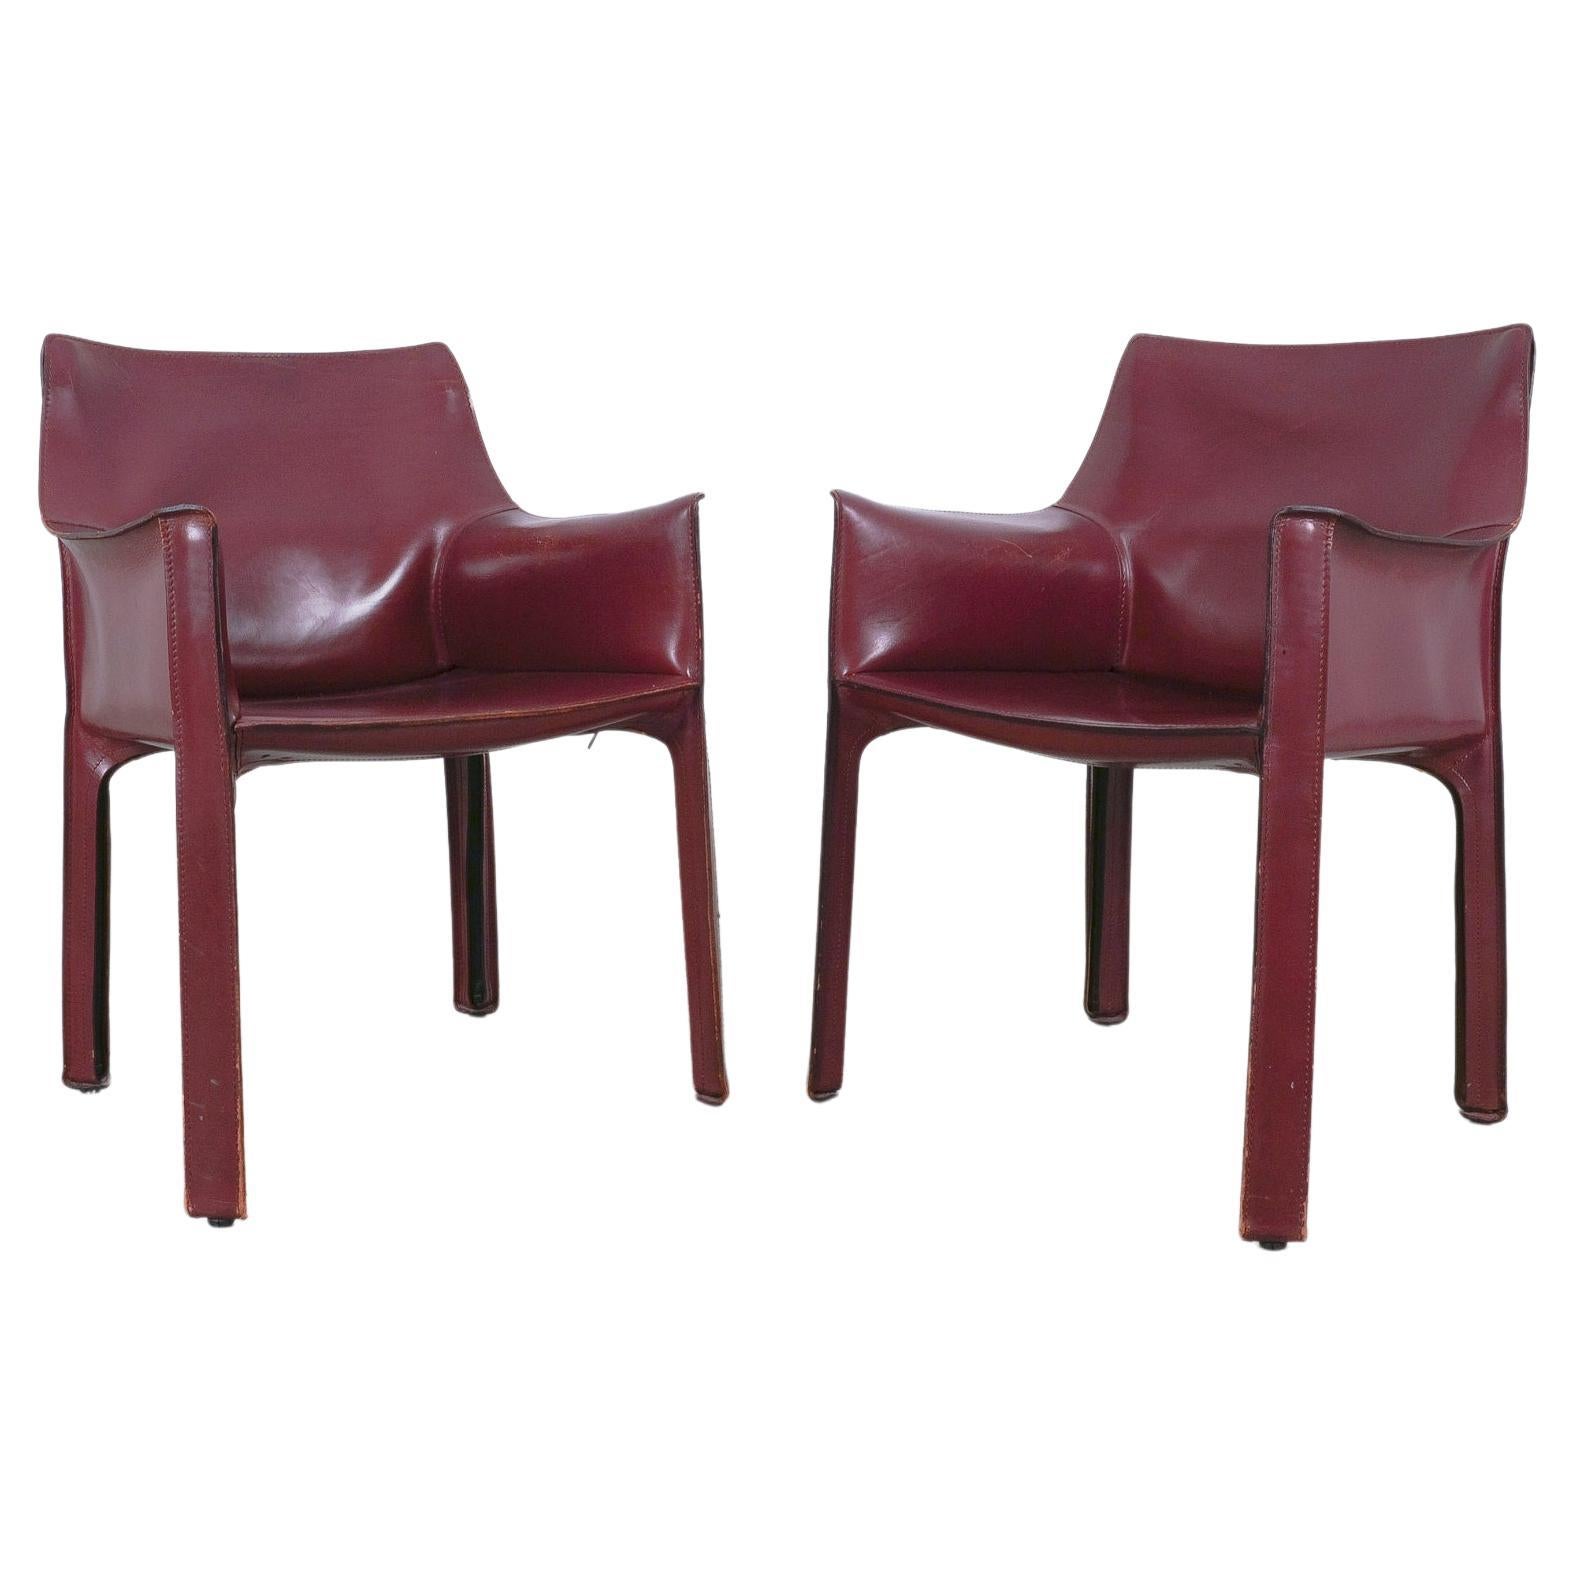 Mario Bellini Cassina Cab 413 Burgundy Red Leather Dining Chairs, 1980 For Sale